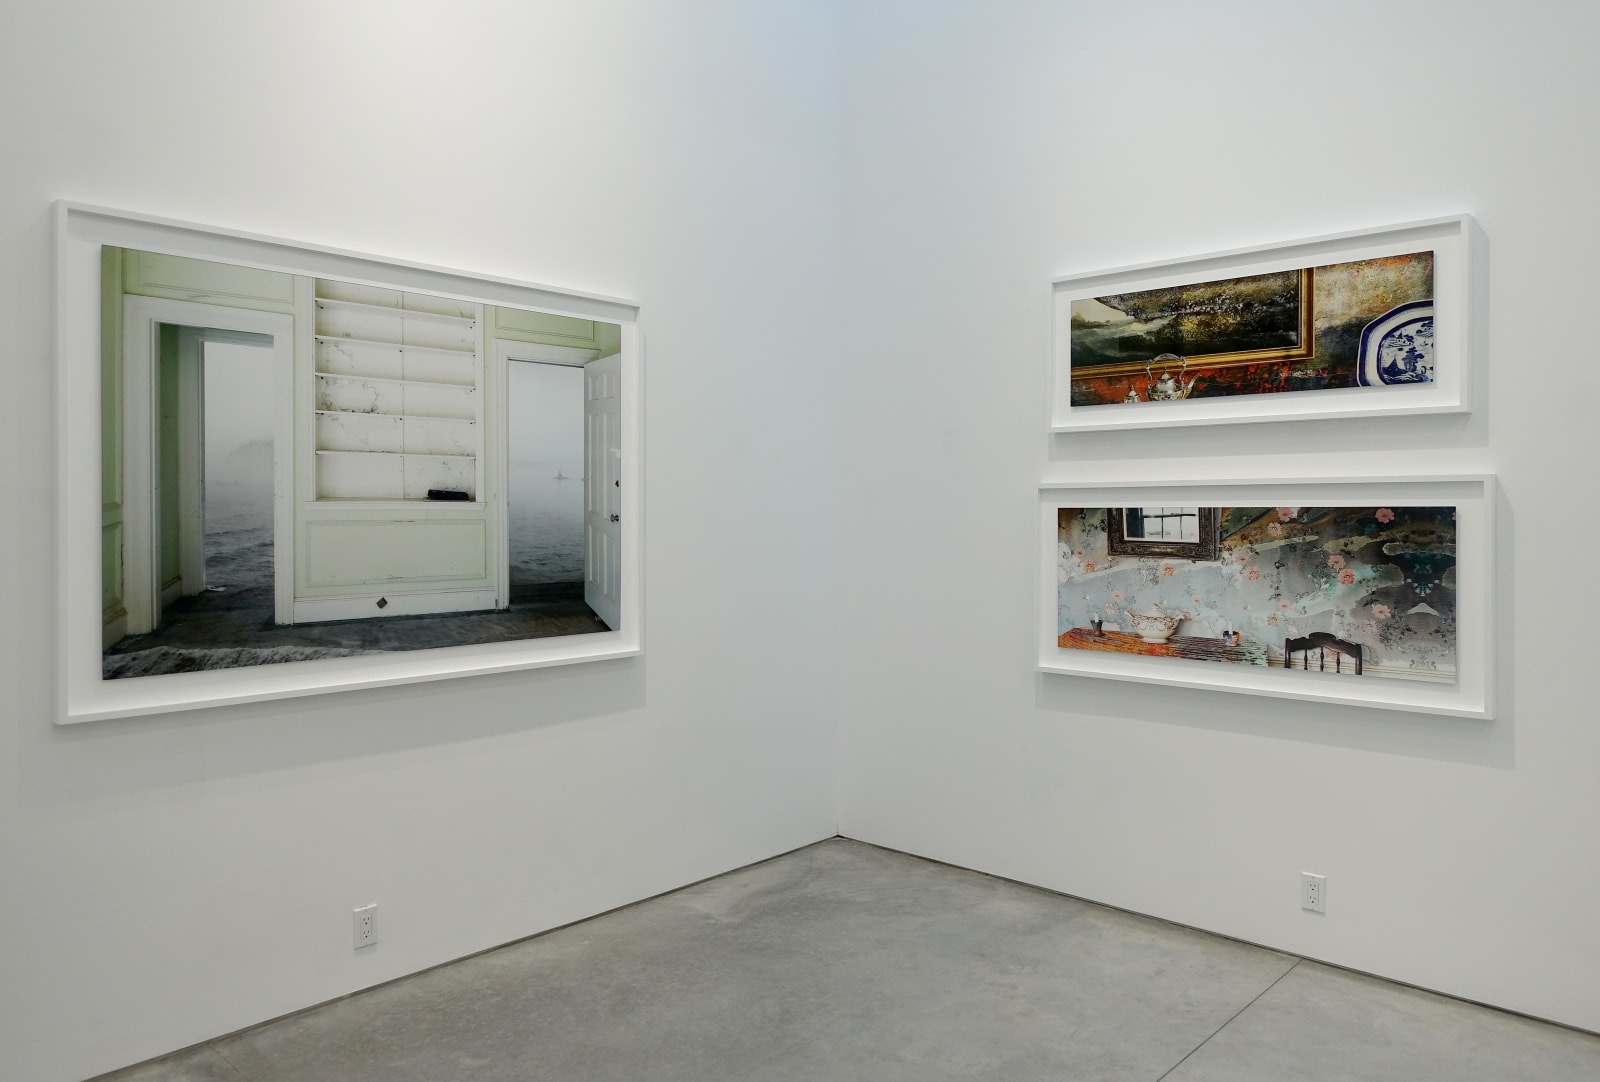 Installation view: Looking Out, Looking In: Jeffery Becton